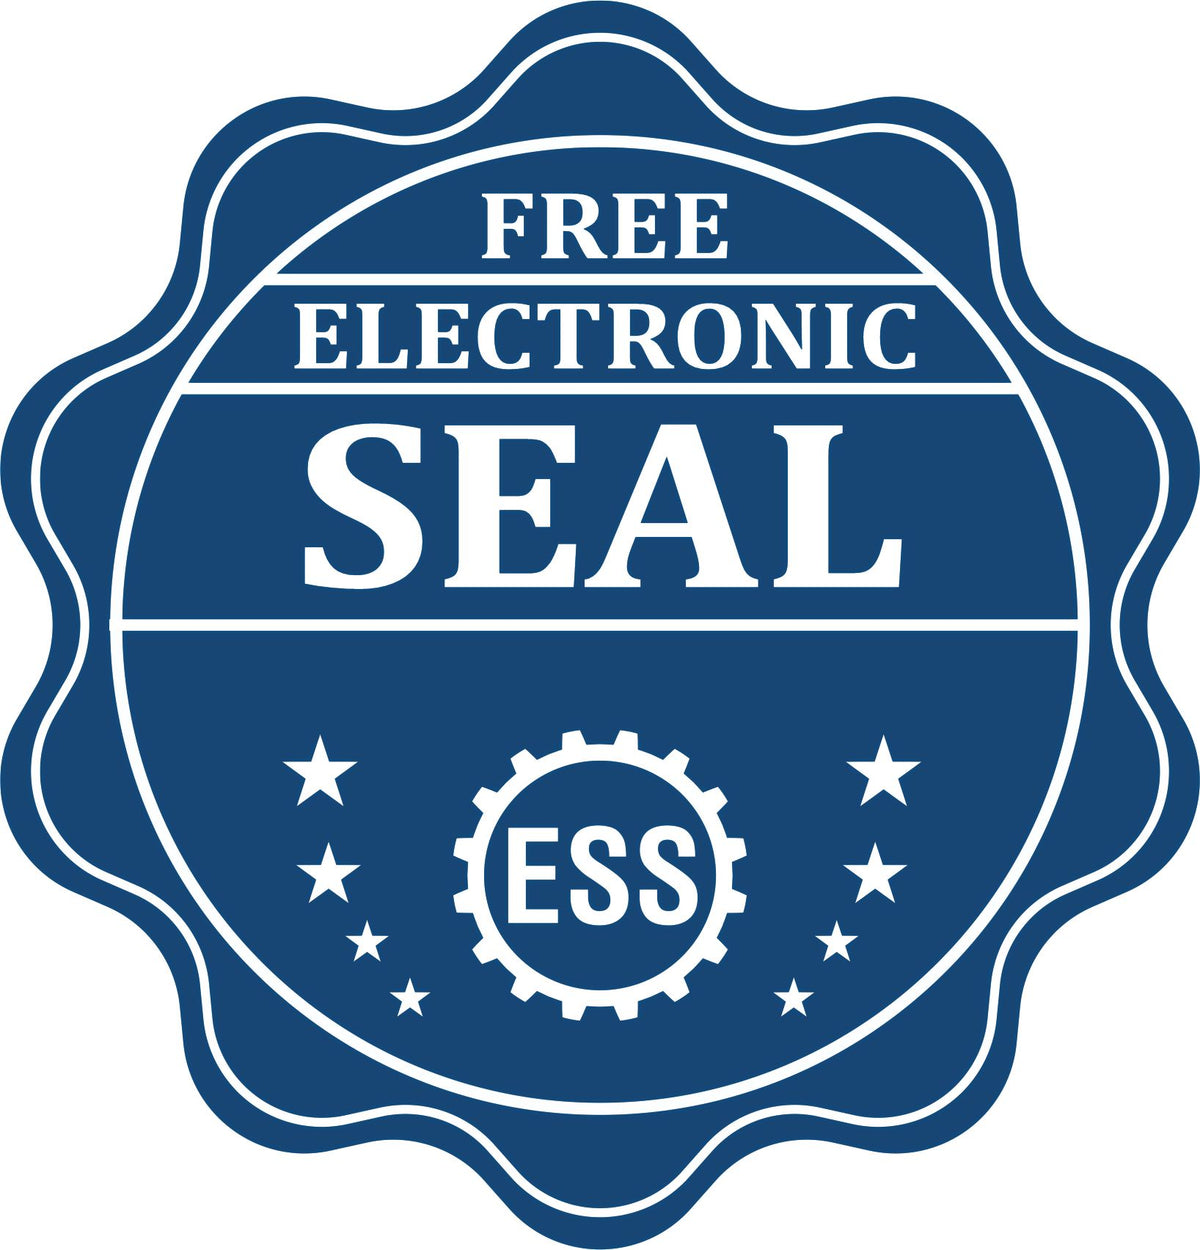 A badge showing a free electronic seal for the Handheld Colorado Land Surveyor Seal with stars and the ESS gear on the emblem.